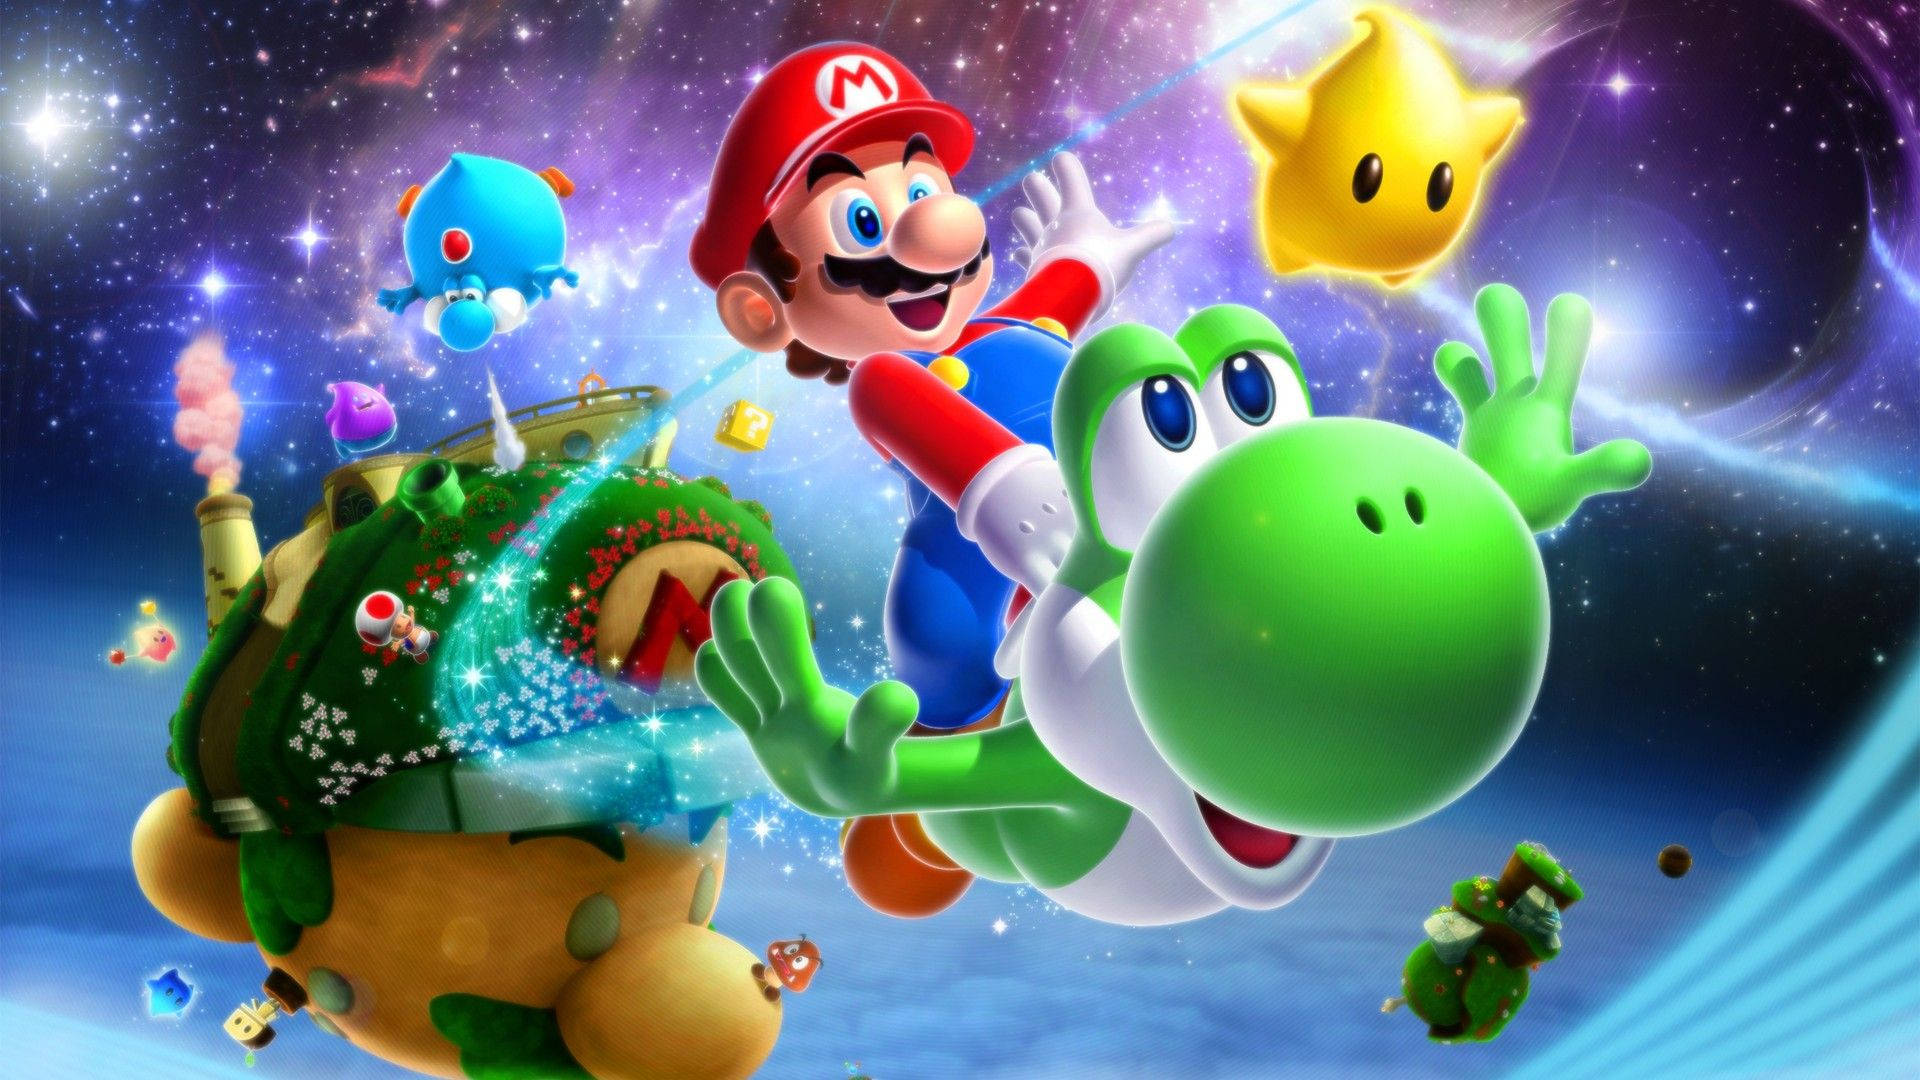 Free Mario Wallpaper Downloads, [200+] Mario Wallpapers for FREE |  